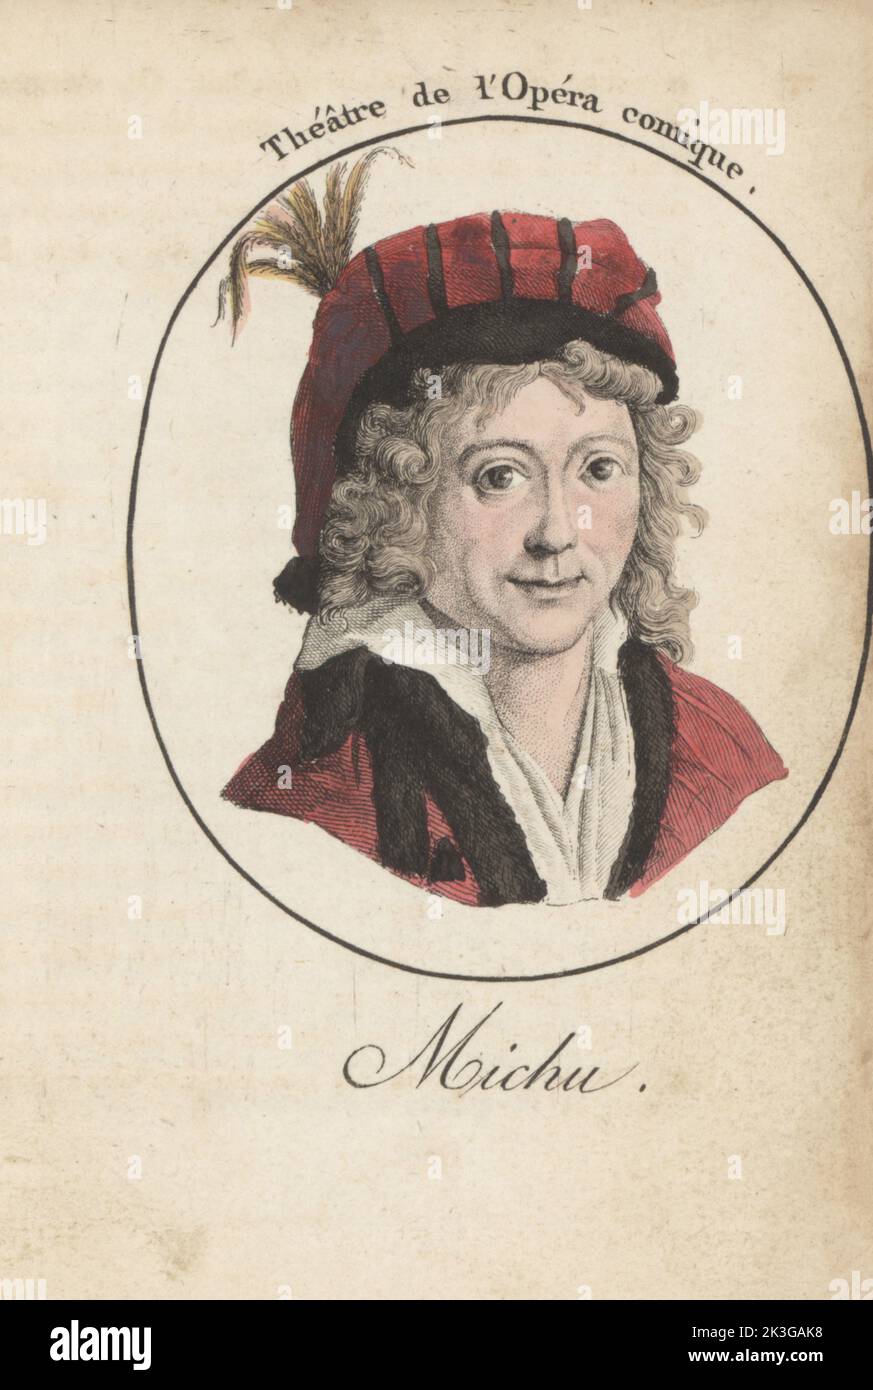 Louis Michu, French actor, singer and musician who performed at the Theatre Italien, later the Opera Comique, 1754-1801. Drowned in the Seine in 1801. Michu. Theatre de l'Opera Comique. Handcoloured stipple engraving after Jacques Grasset Saint-Sauveur from Acteurs et Actrices Celebres, Famous Actors and Actresses, Chez Latour Libraire, Paris, 1808. Stock Photo